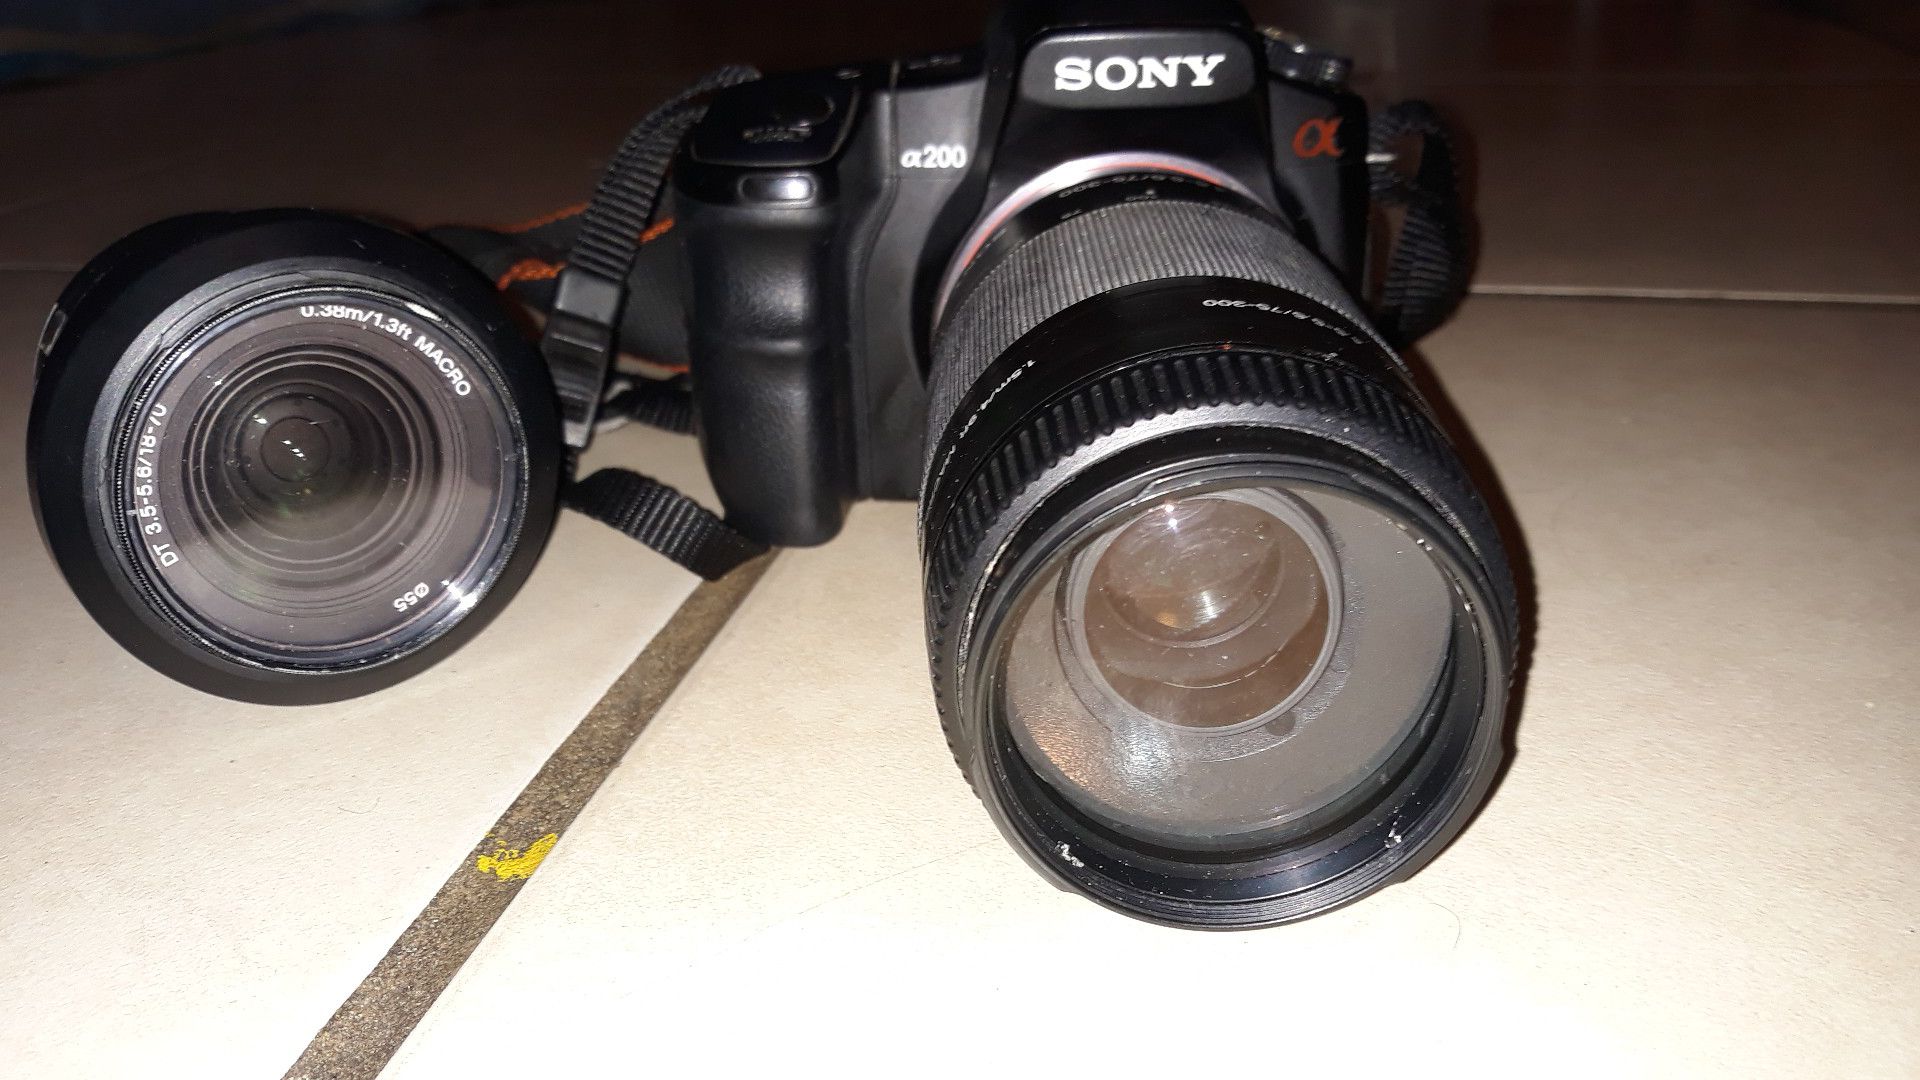 Sony camera 0x200 w/ case & charger